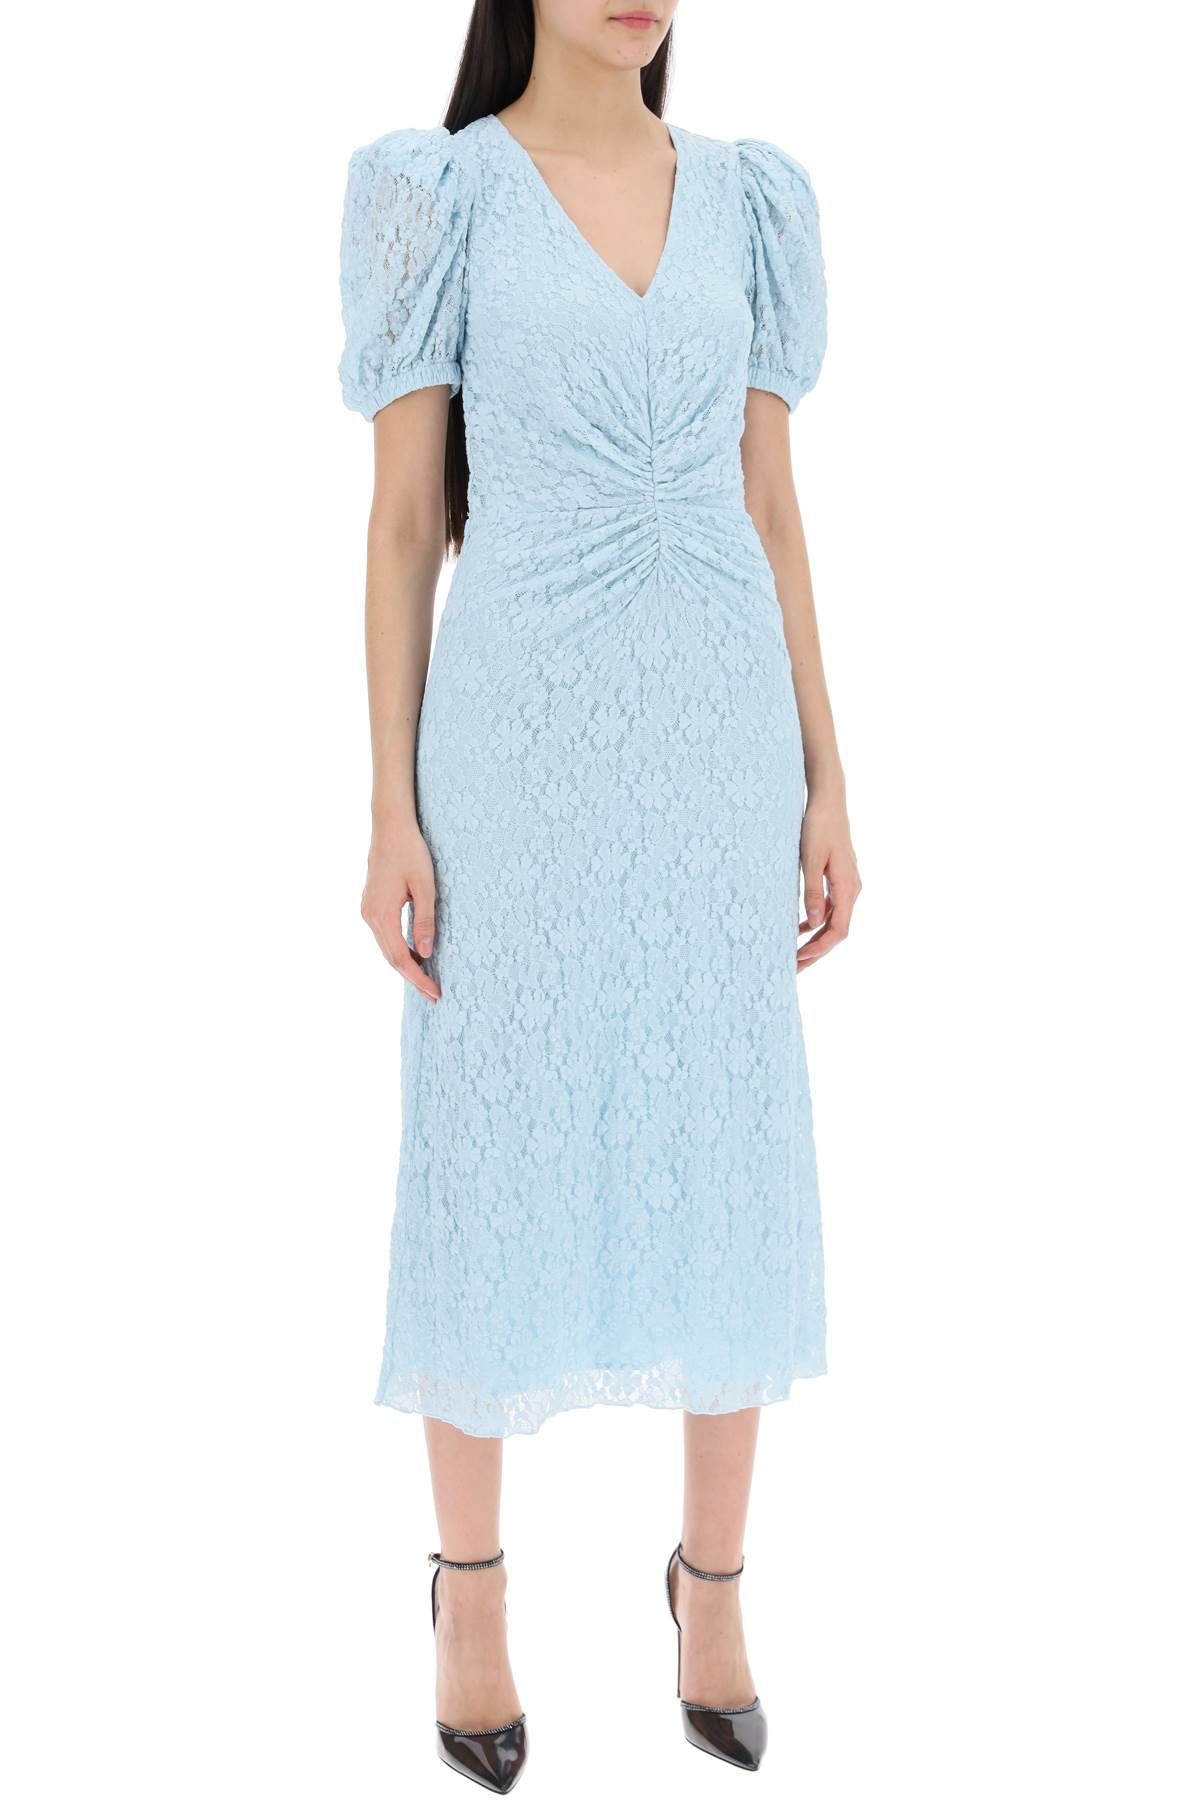 Shop Rotate Birger Christensen Midi Lace Dress With Puffed Sleeves In Light Blue